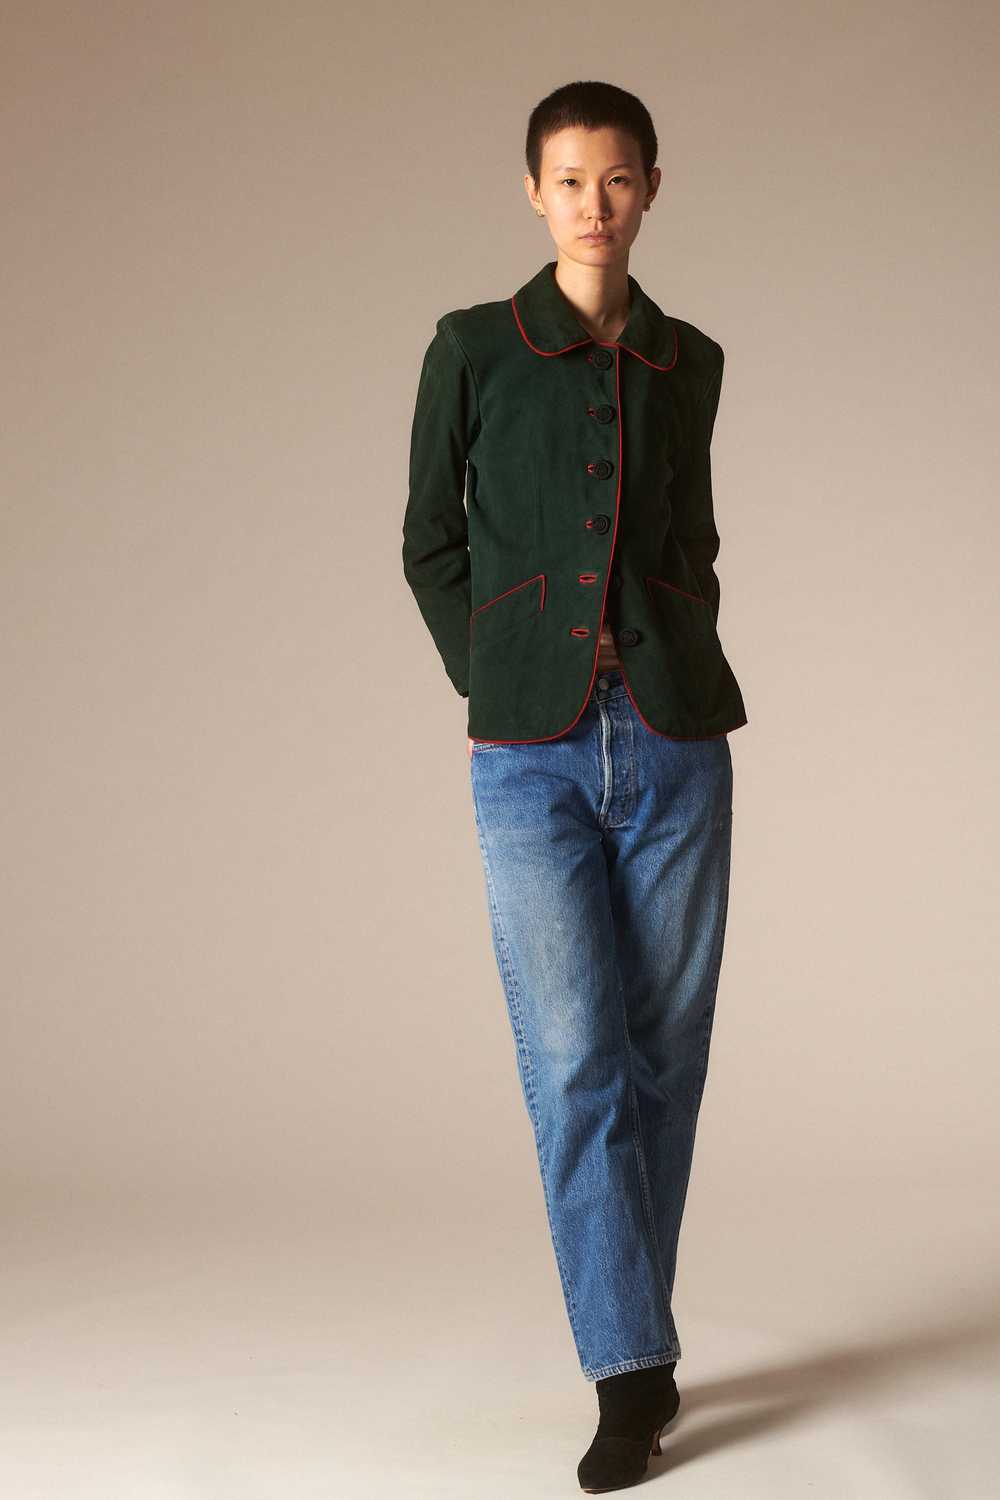 Ysl Suede Coat in Forest Green - image 1